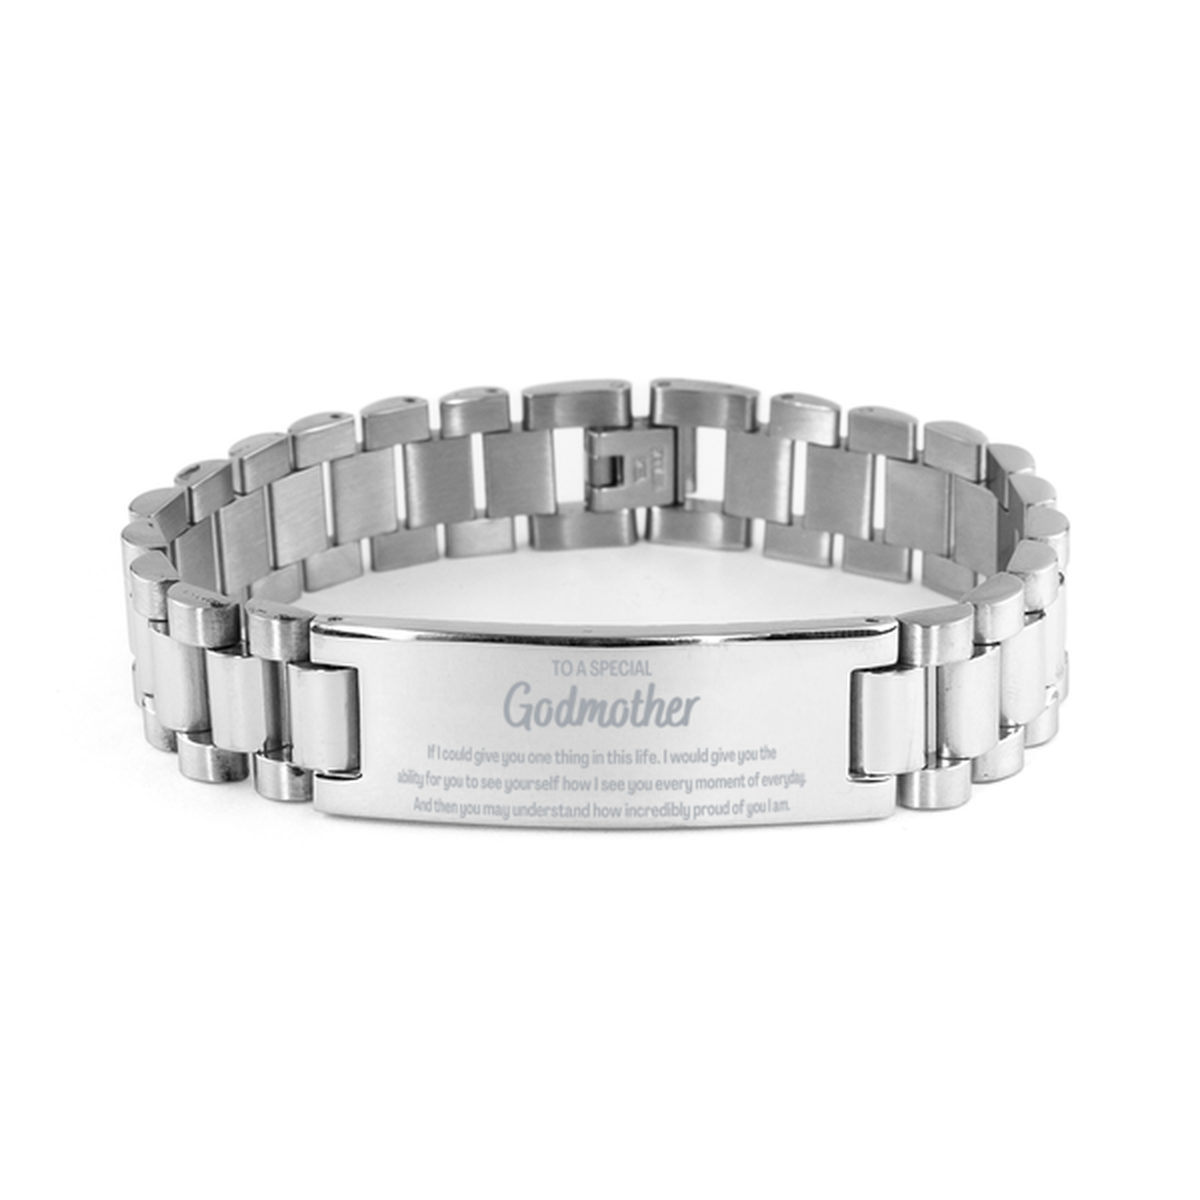 To My Godmother Ladder Stainless Steel Bracelet, Gifts For Godmother Engraved, Inspirational Gifts for Christmas Birthday, Epic Gifts for Godmother To A Special Godmother how incredibly proud of you I am